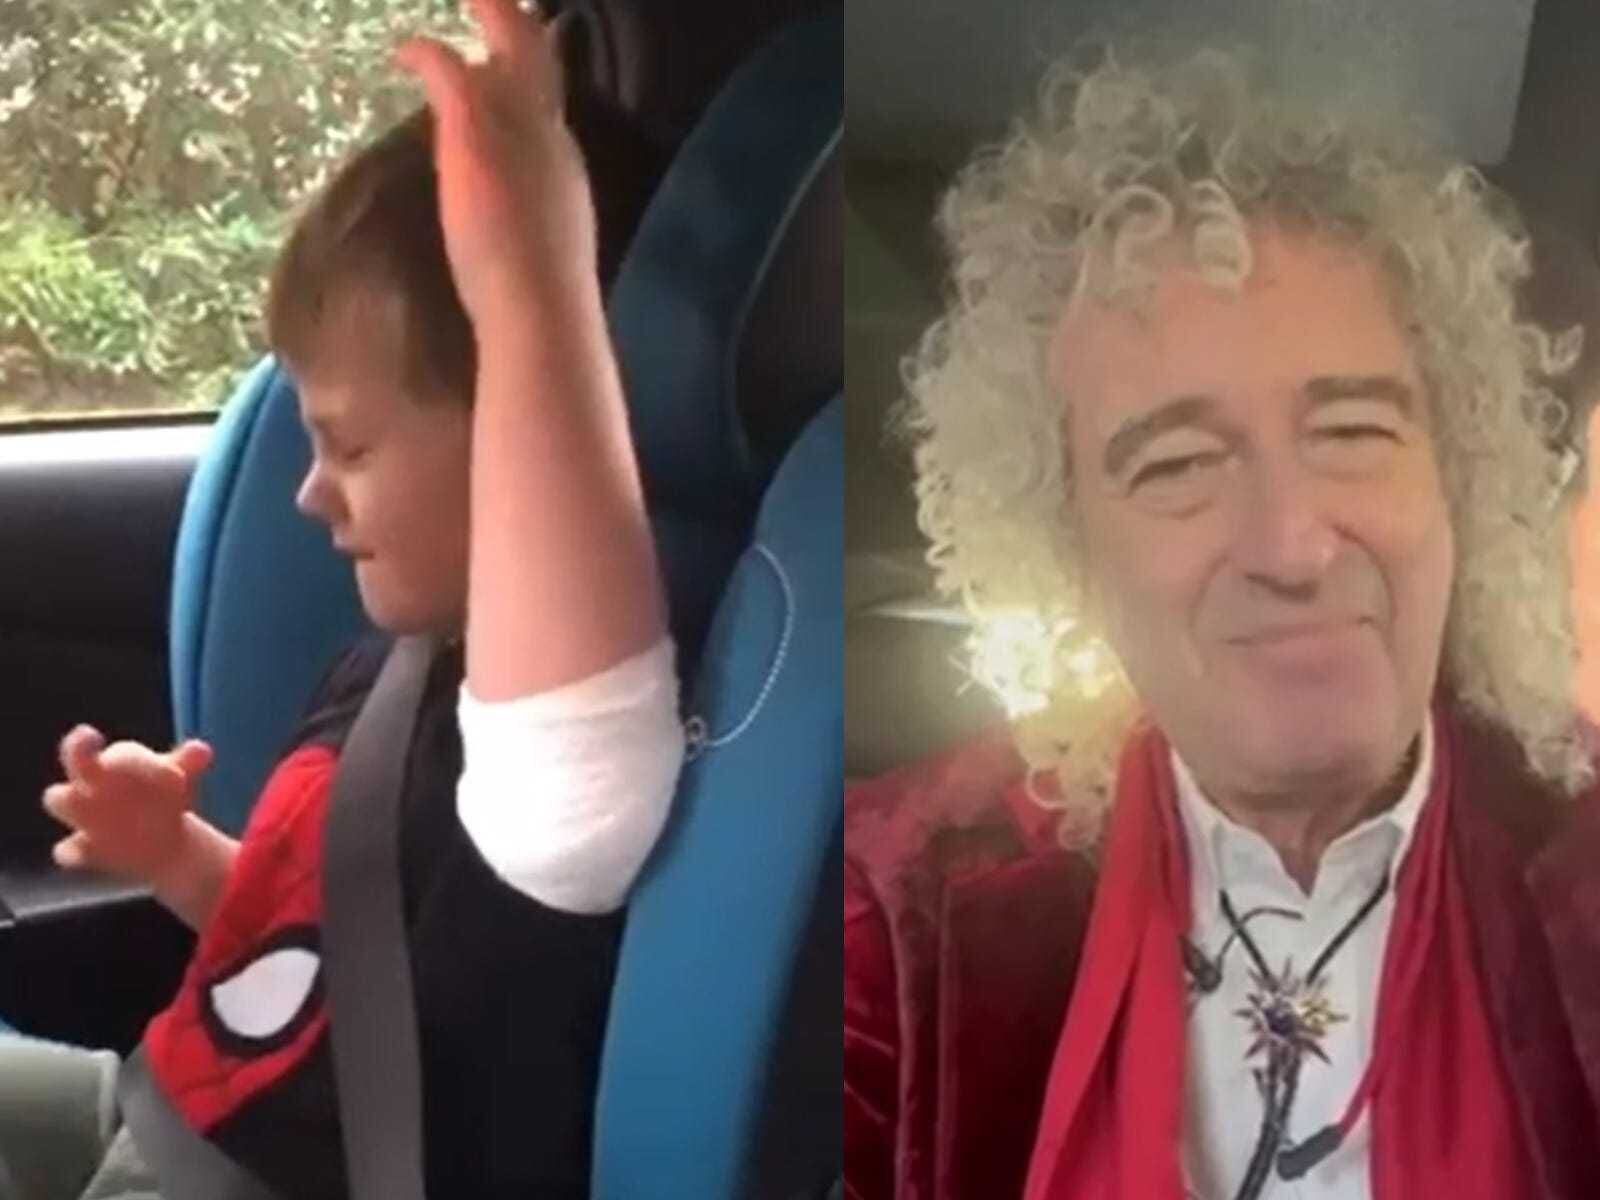 Sir Brian May praises 4-year-old cancer patient for Bohemian Rhapsody air guitar